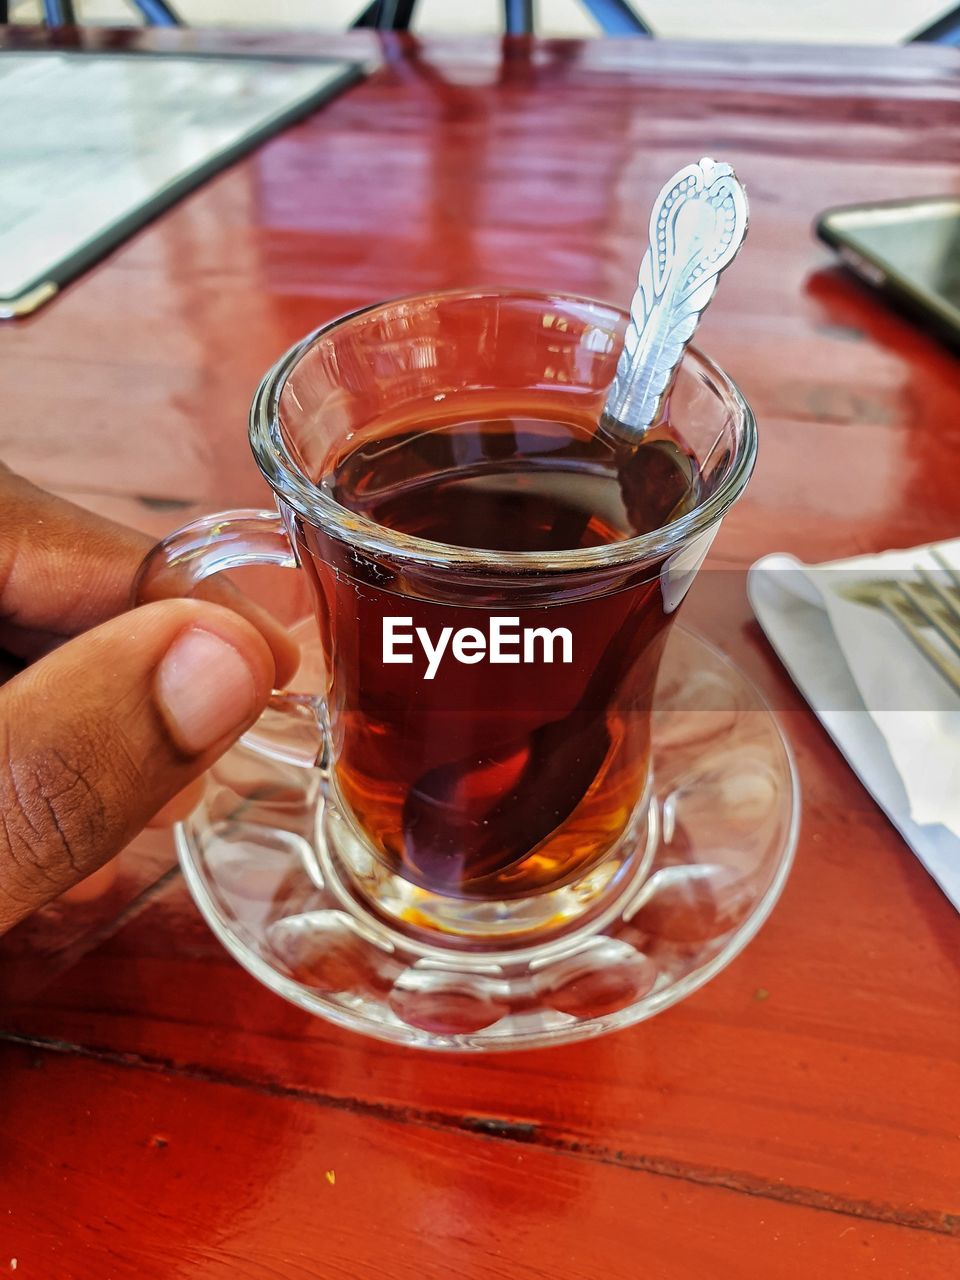 CROPPED IMAGE OF PERSON HOLDING GLASS OF TEA ON TABLE